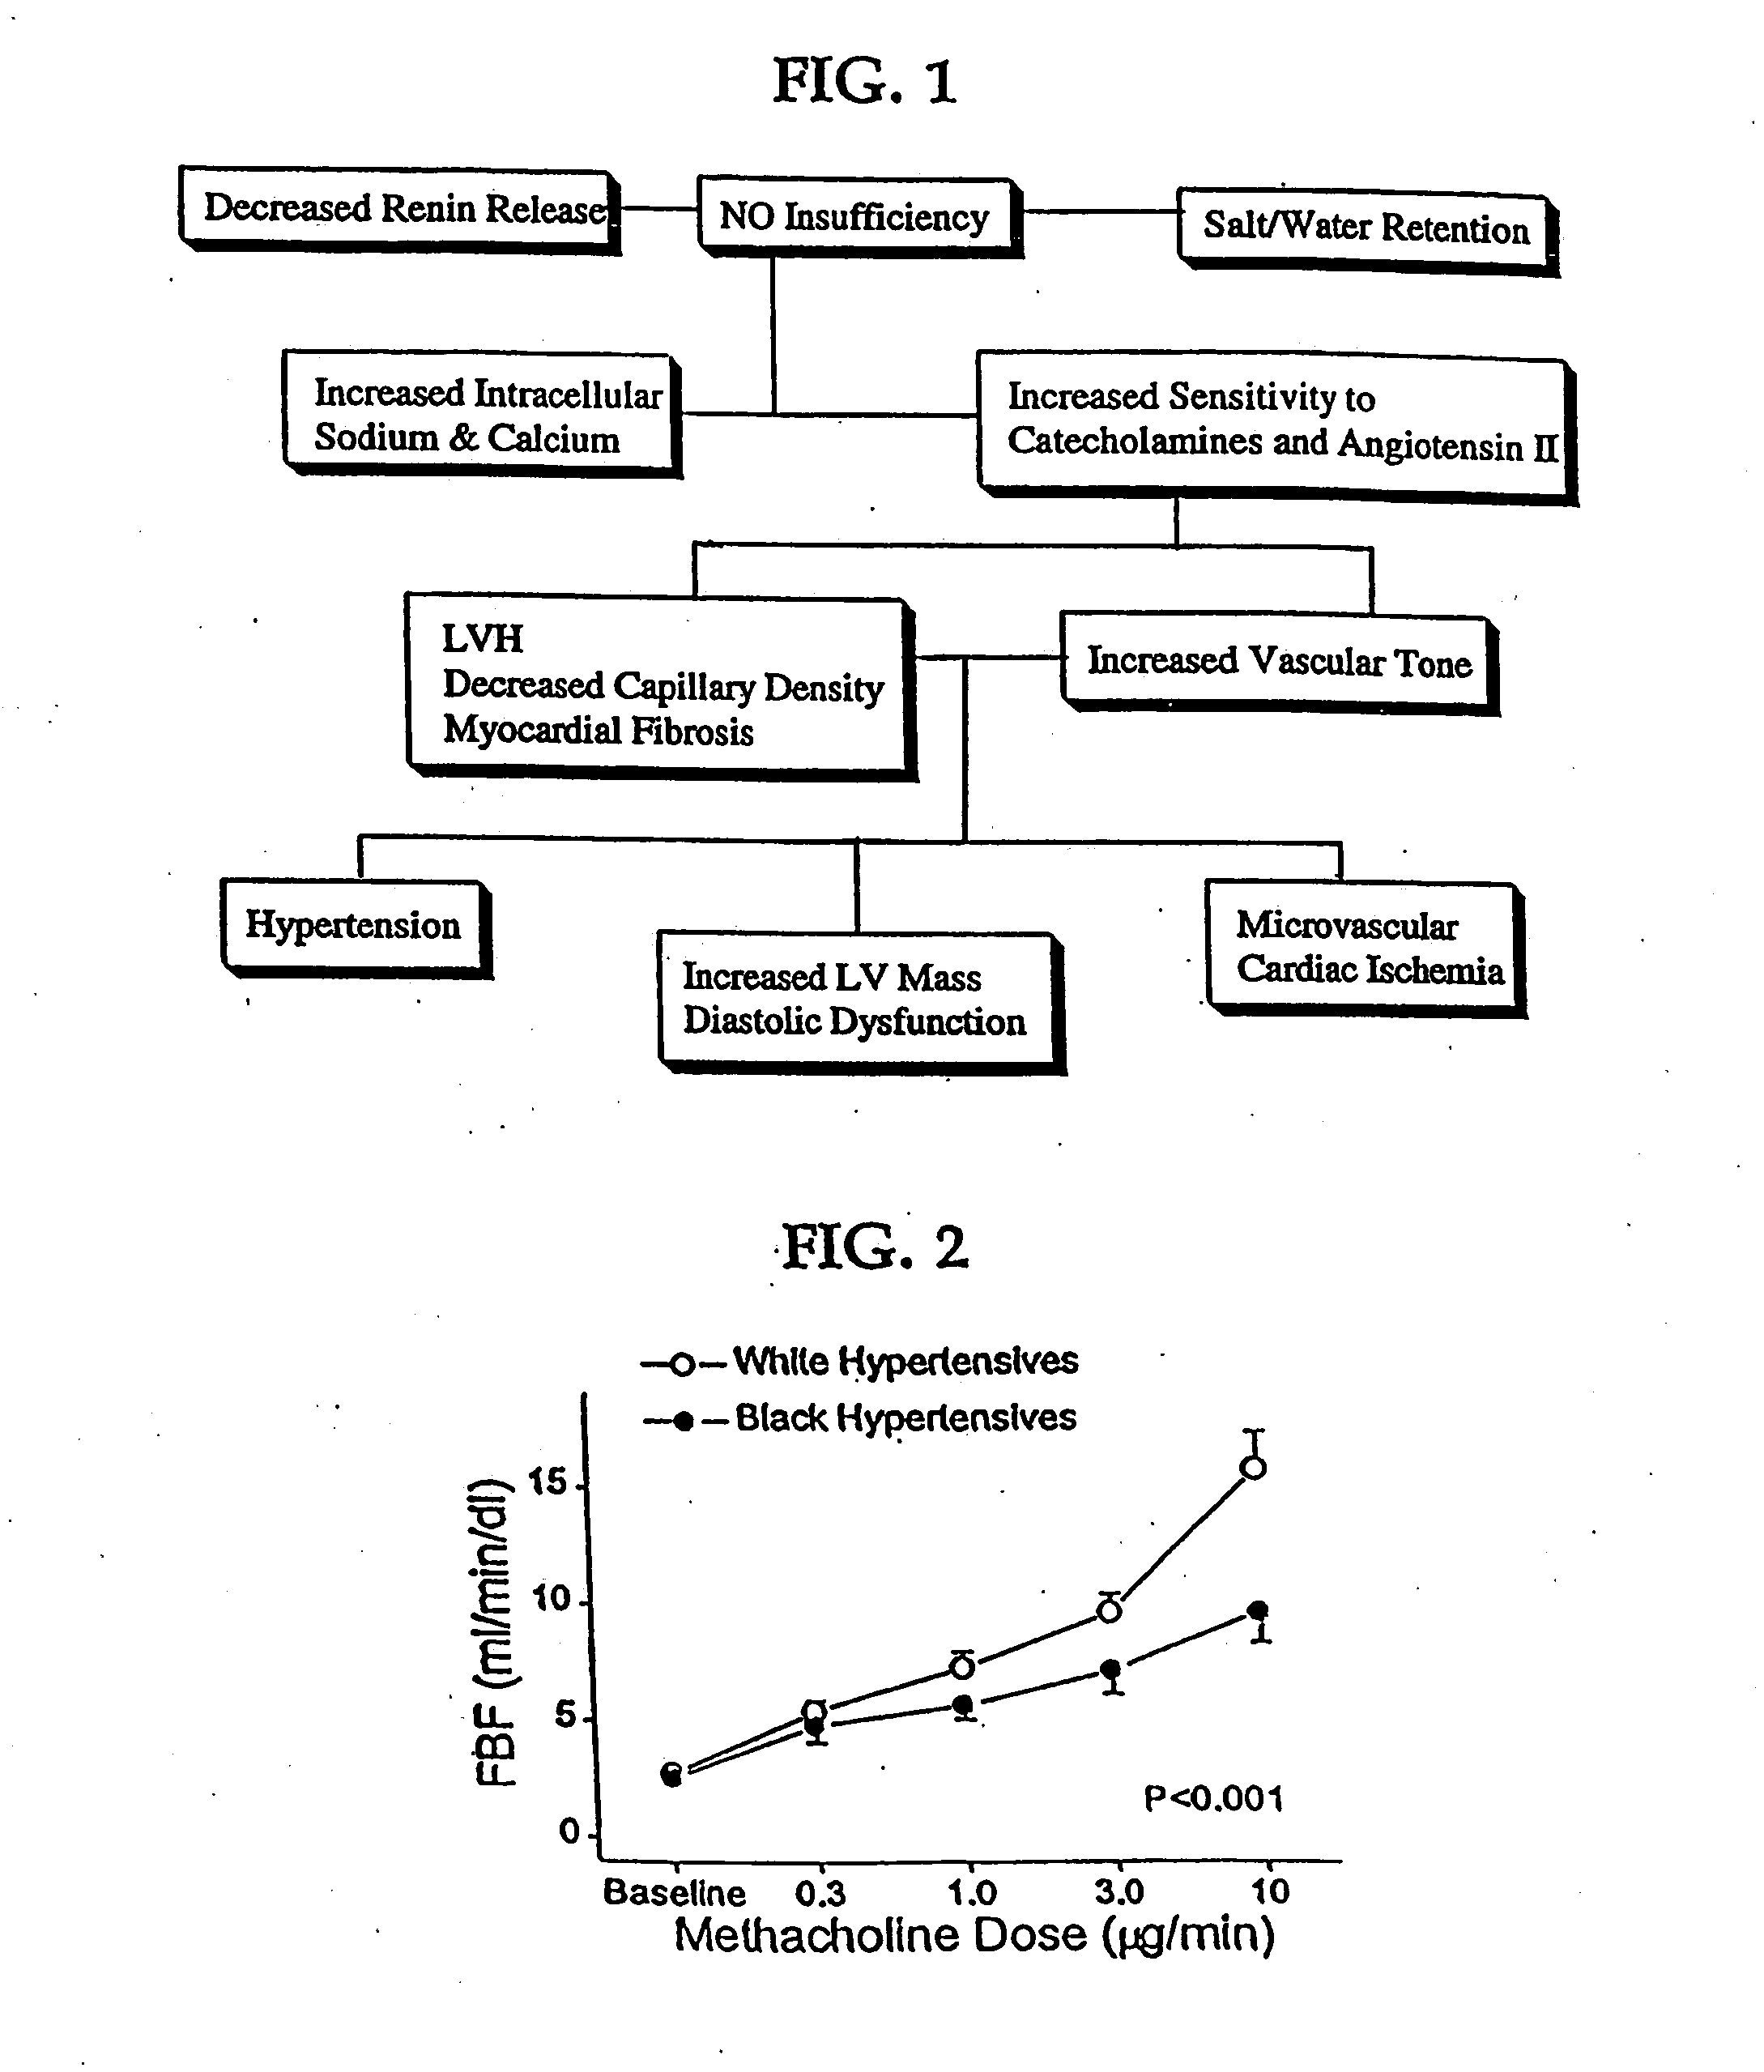 Methods of treating vascular diseases characterized by nitric oxide insufficiency